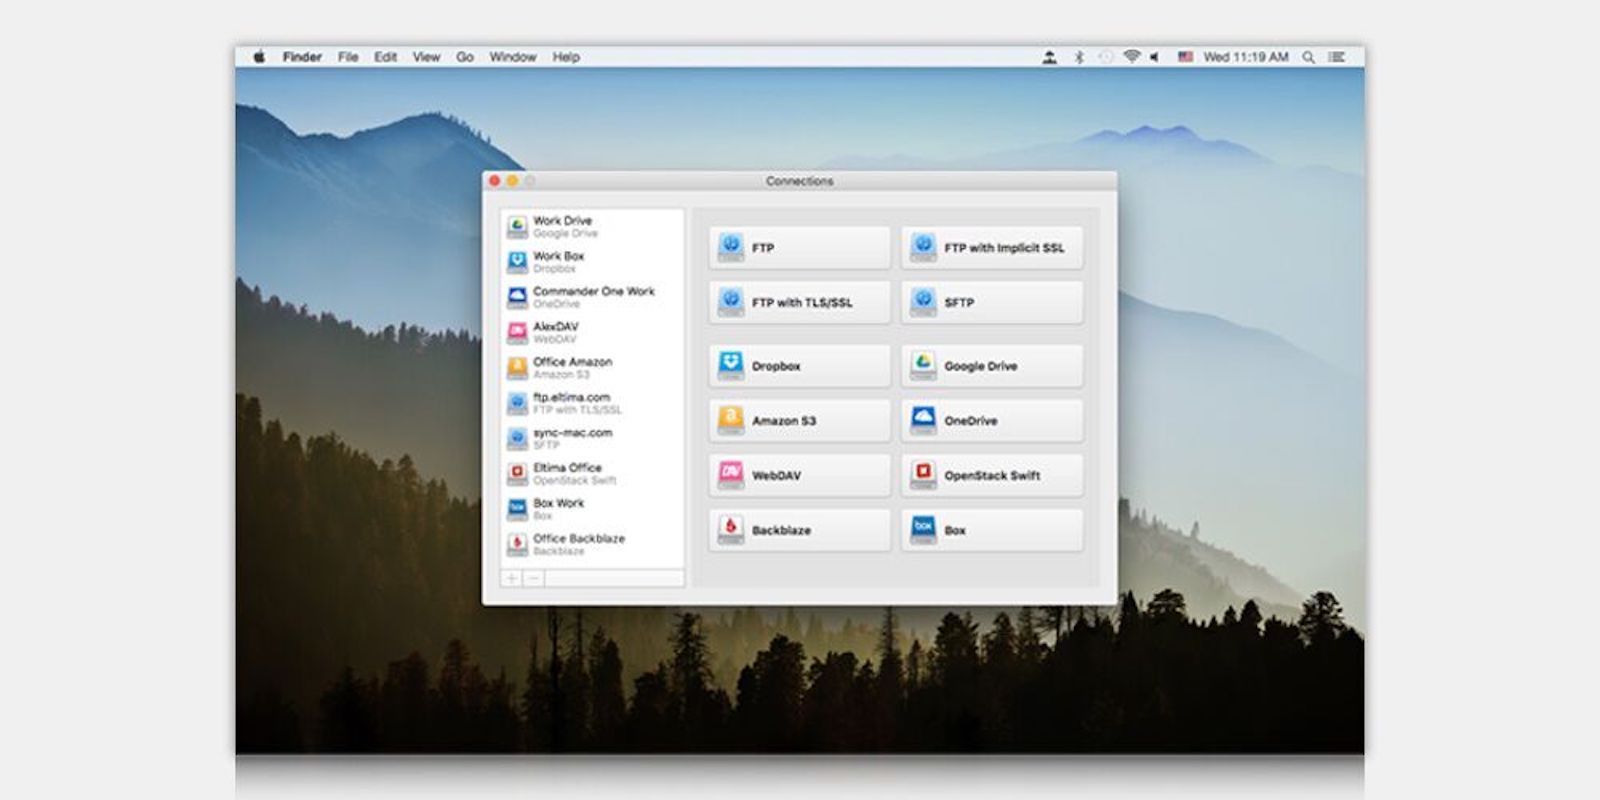 This app brings your cloud storage drives straight to Finder, allowing for intuitive, easy access and management.